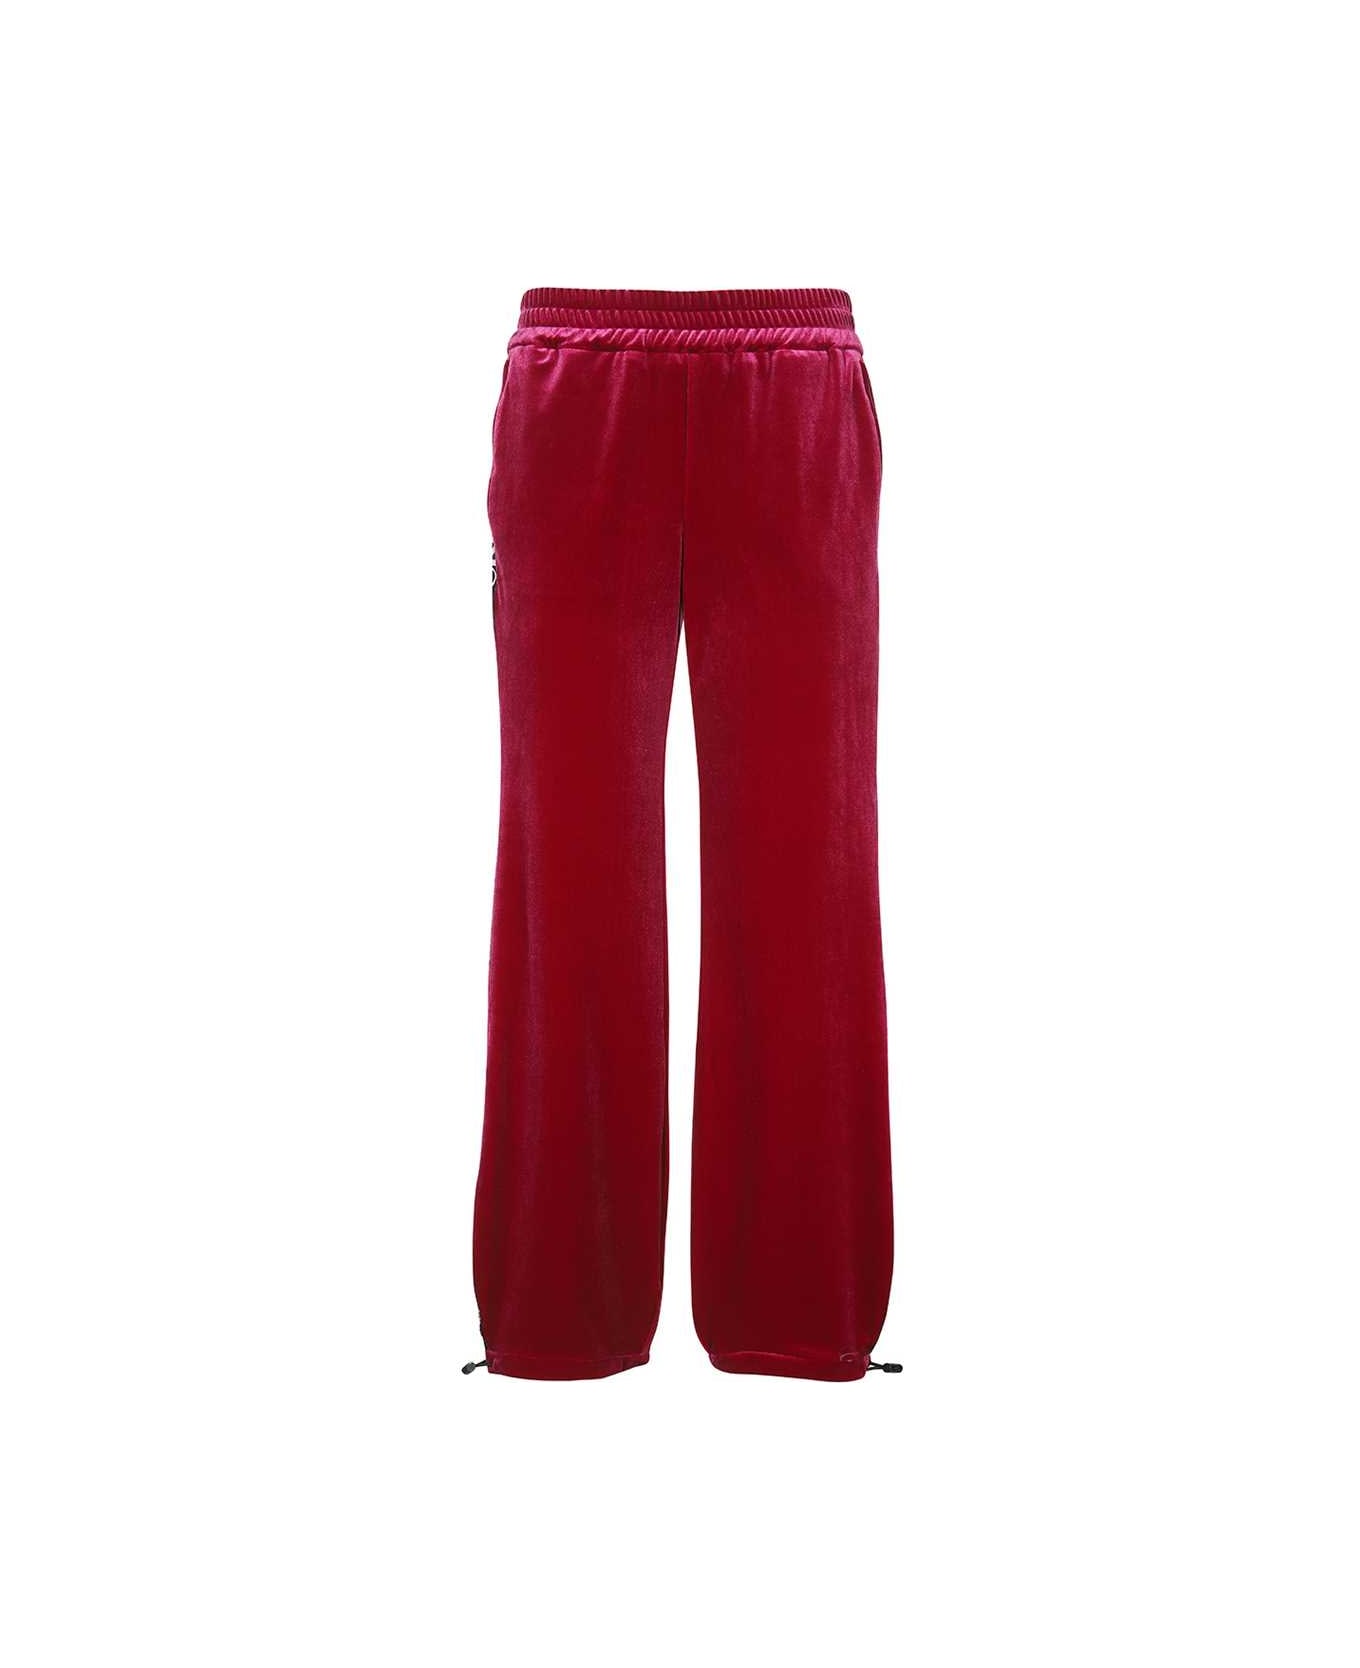 Versace Jeans Couture Velvet Trousers - Burgundy